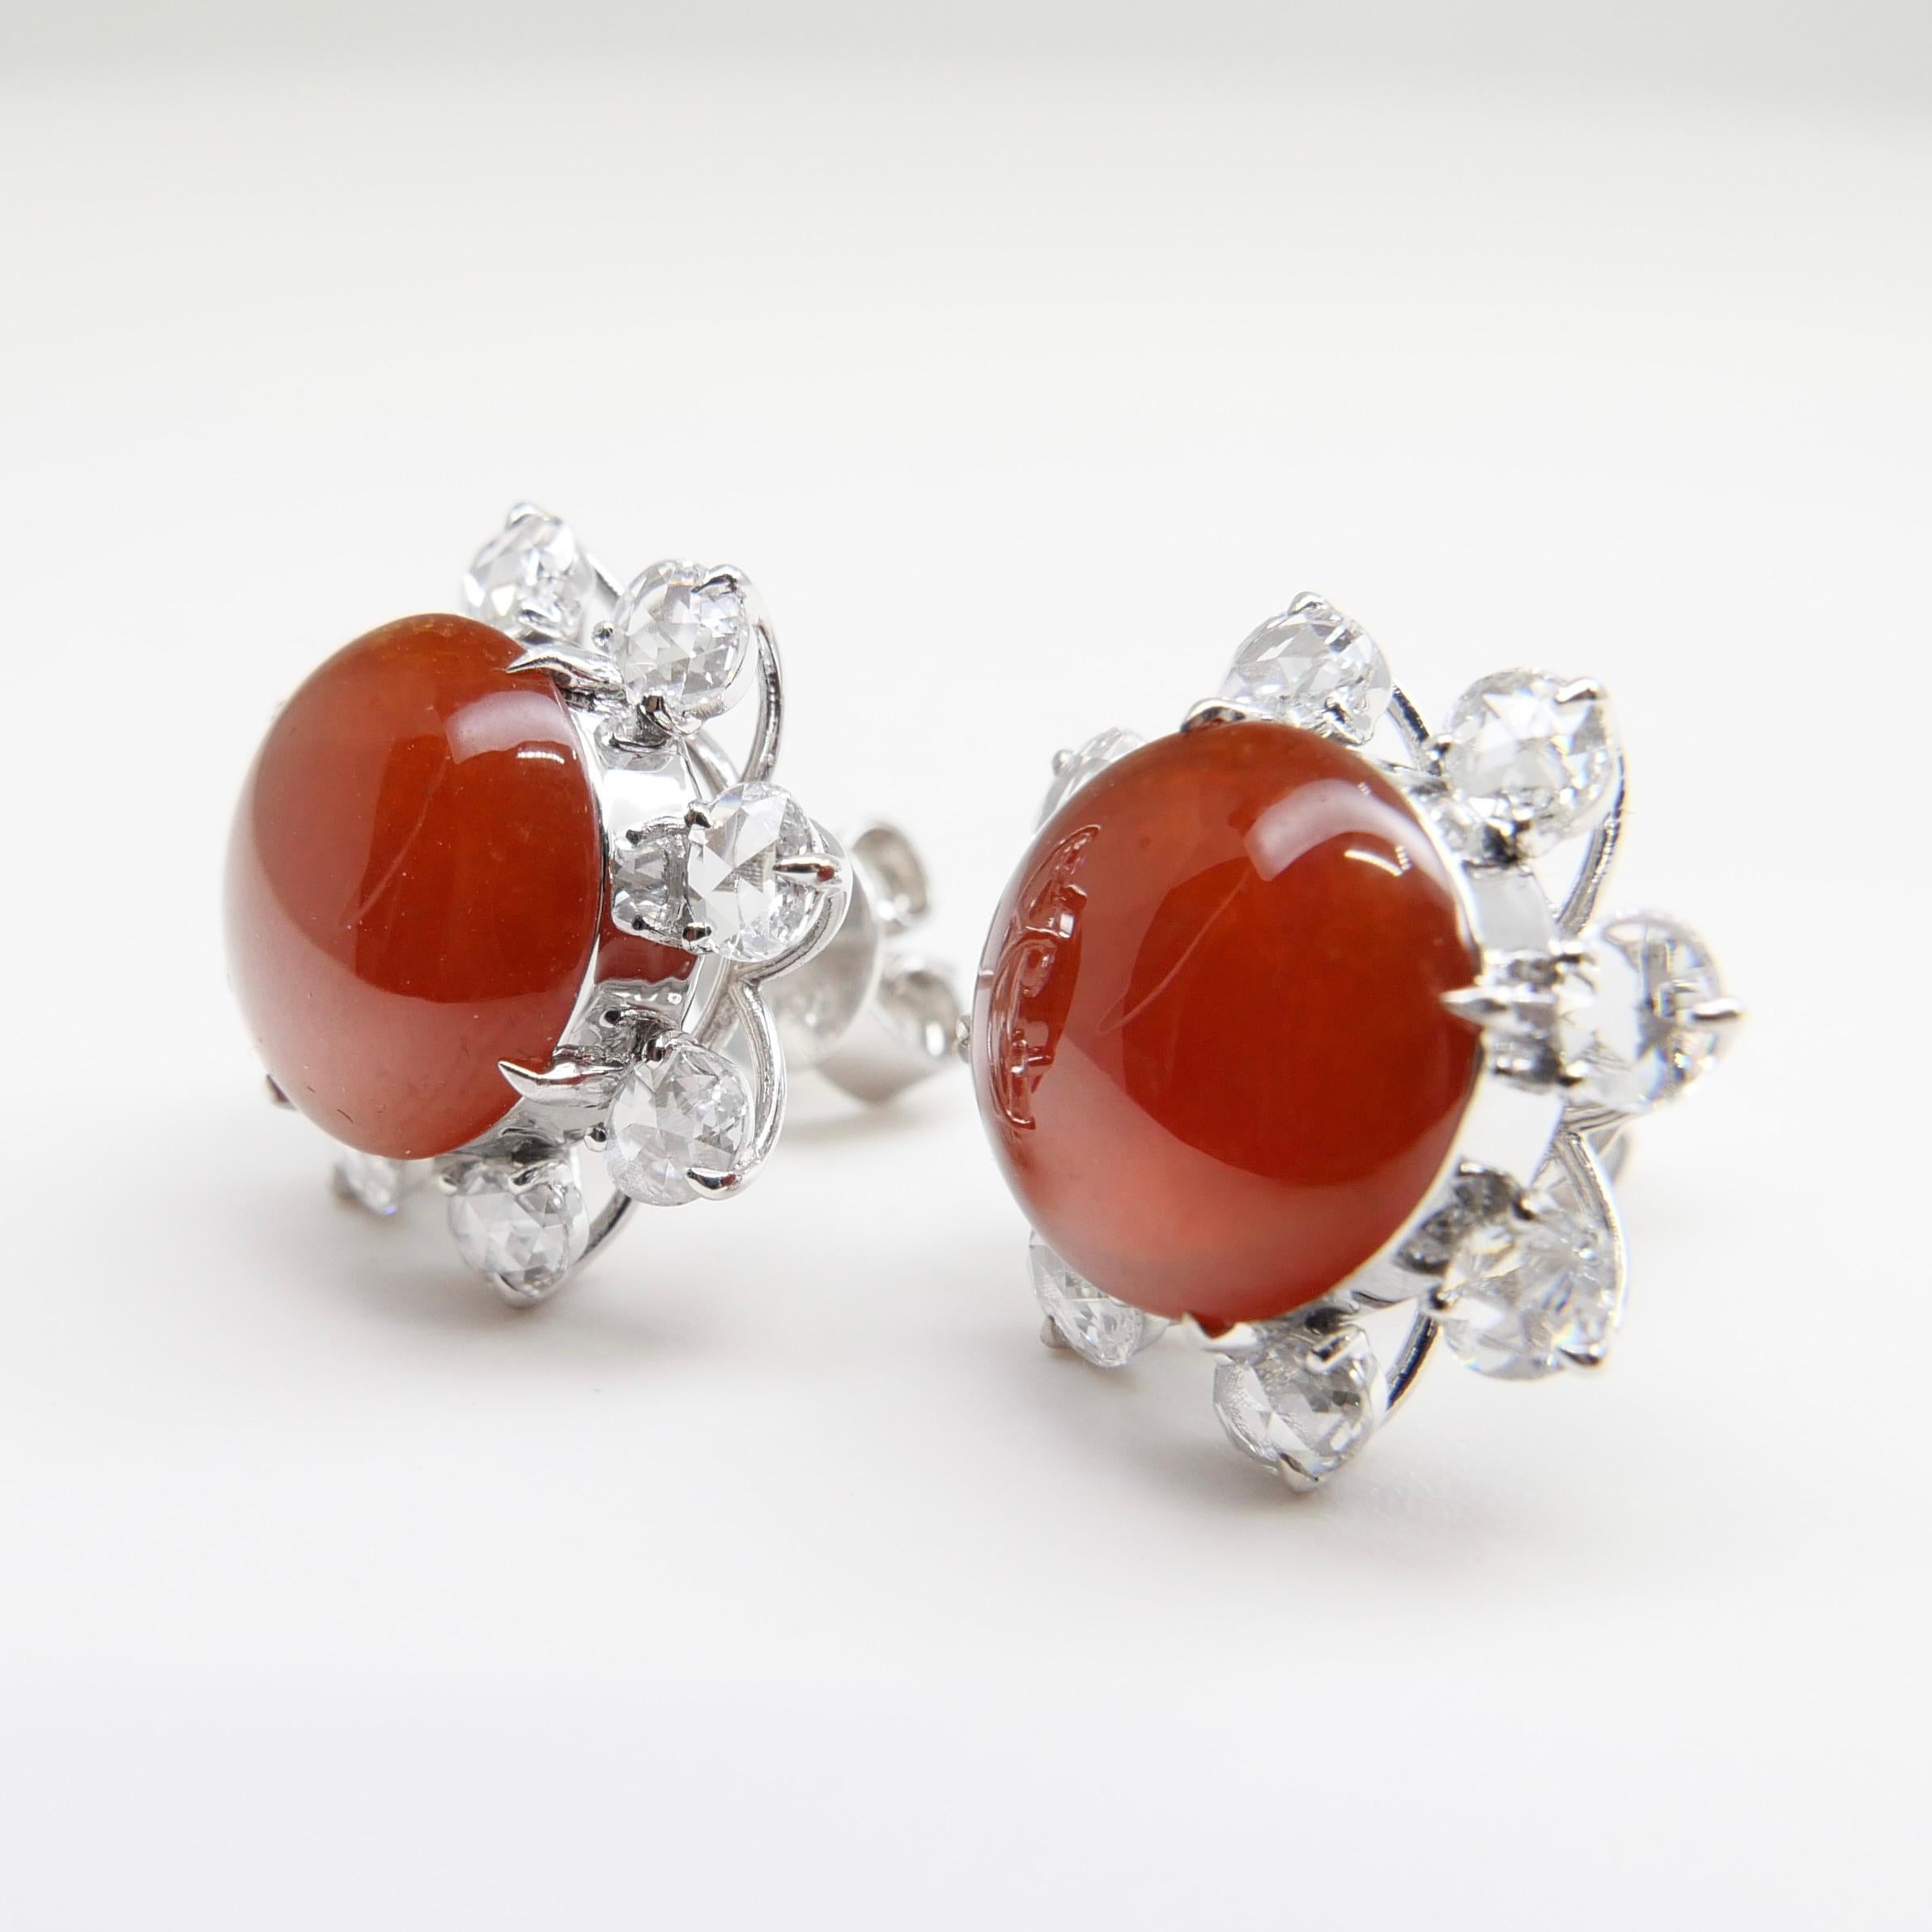 Cabochon Important Certified Imperial Red Jade & Diamond Stud Earrings, Collector's Item For Sale